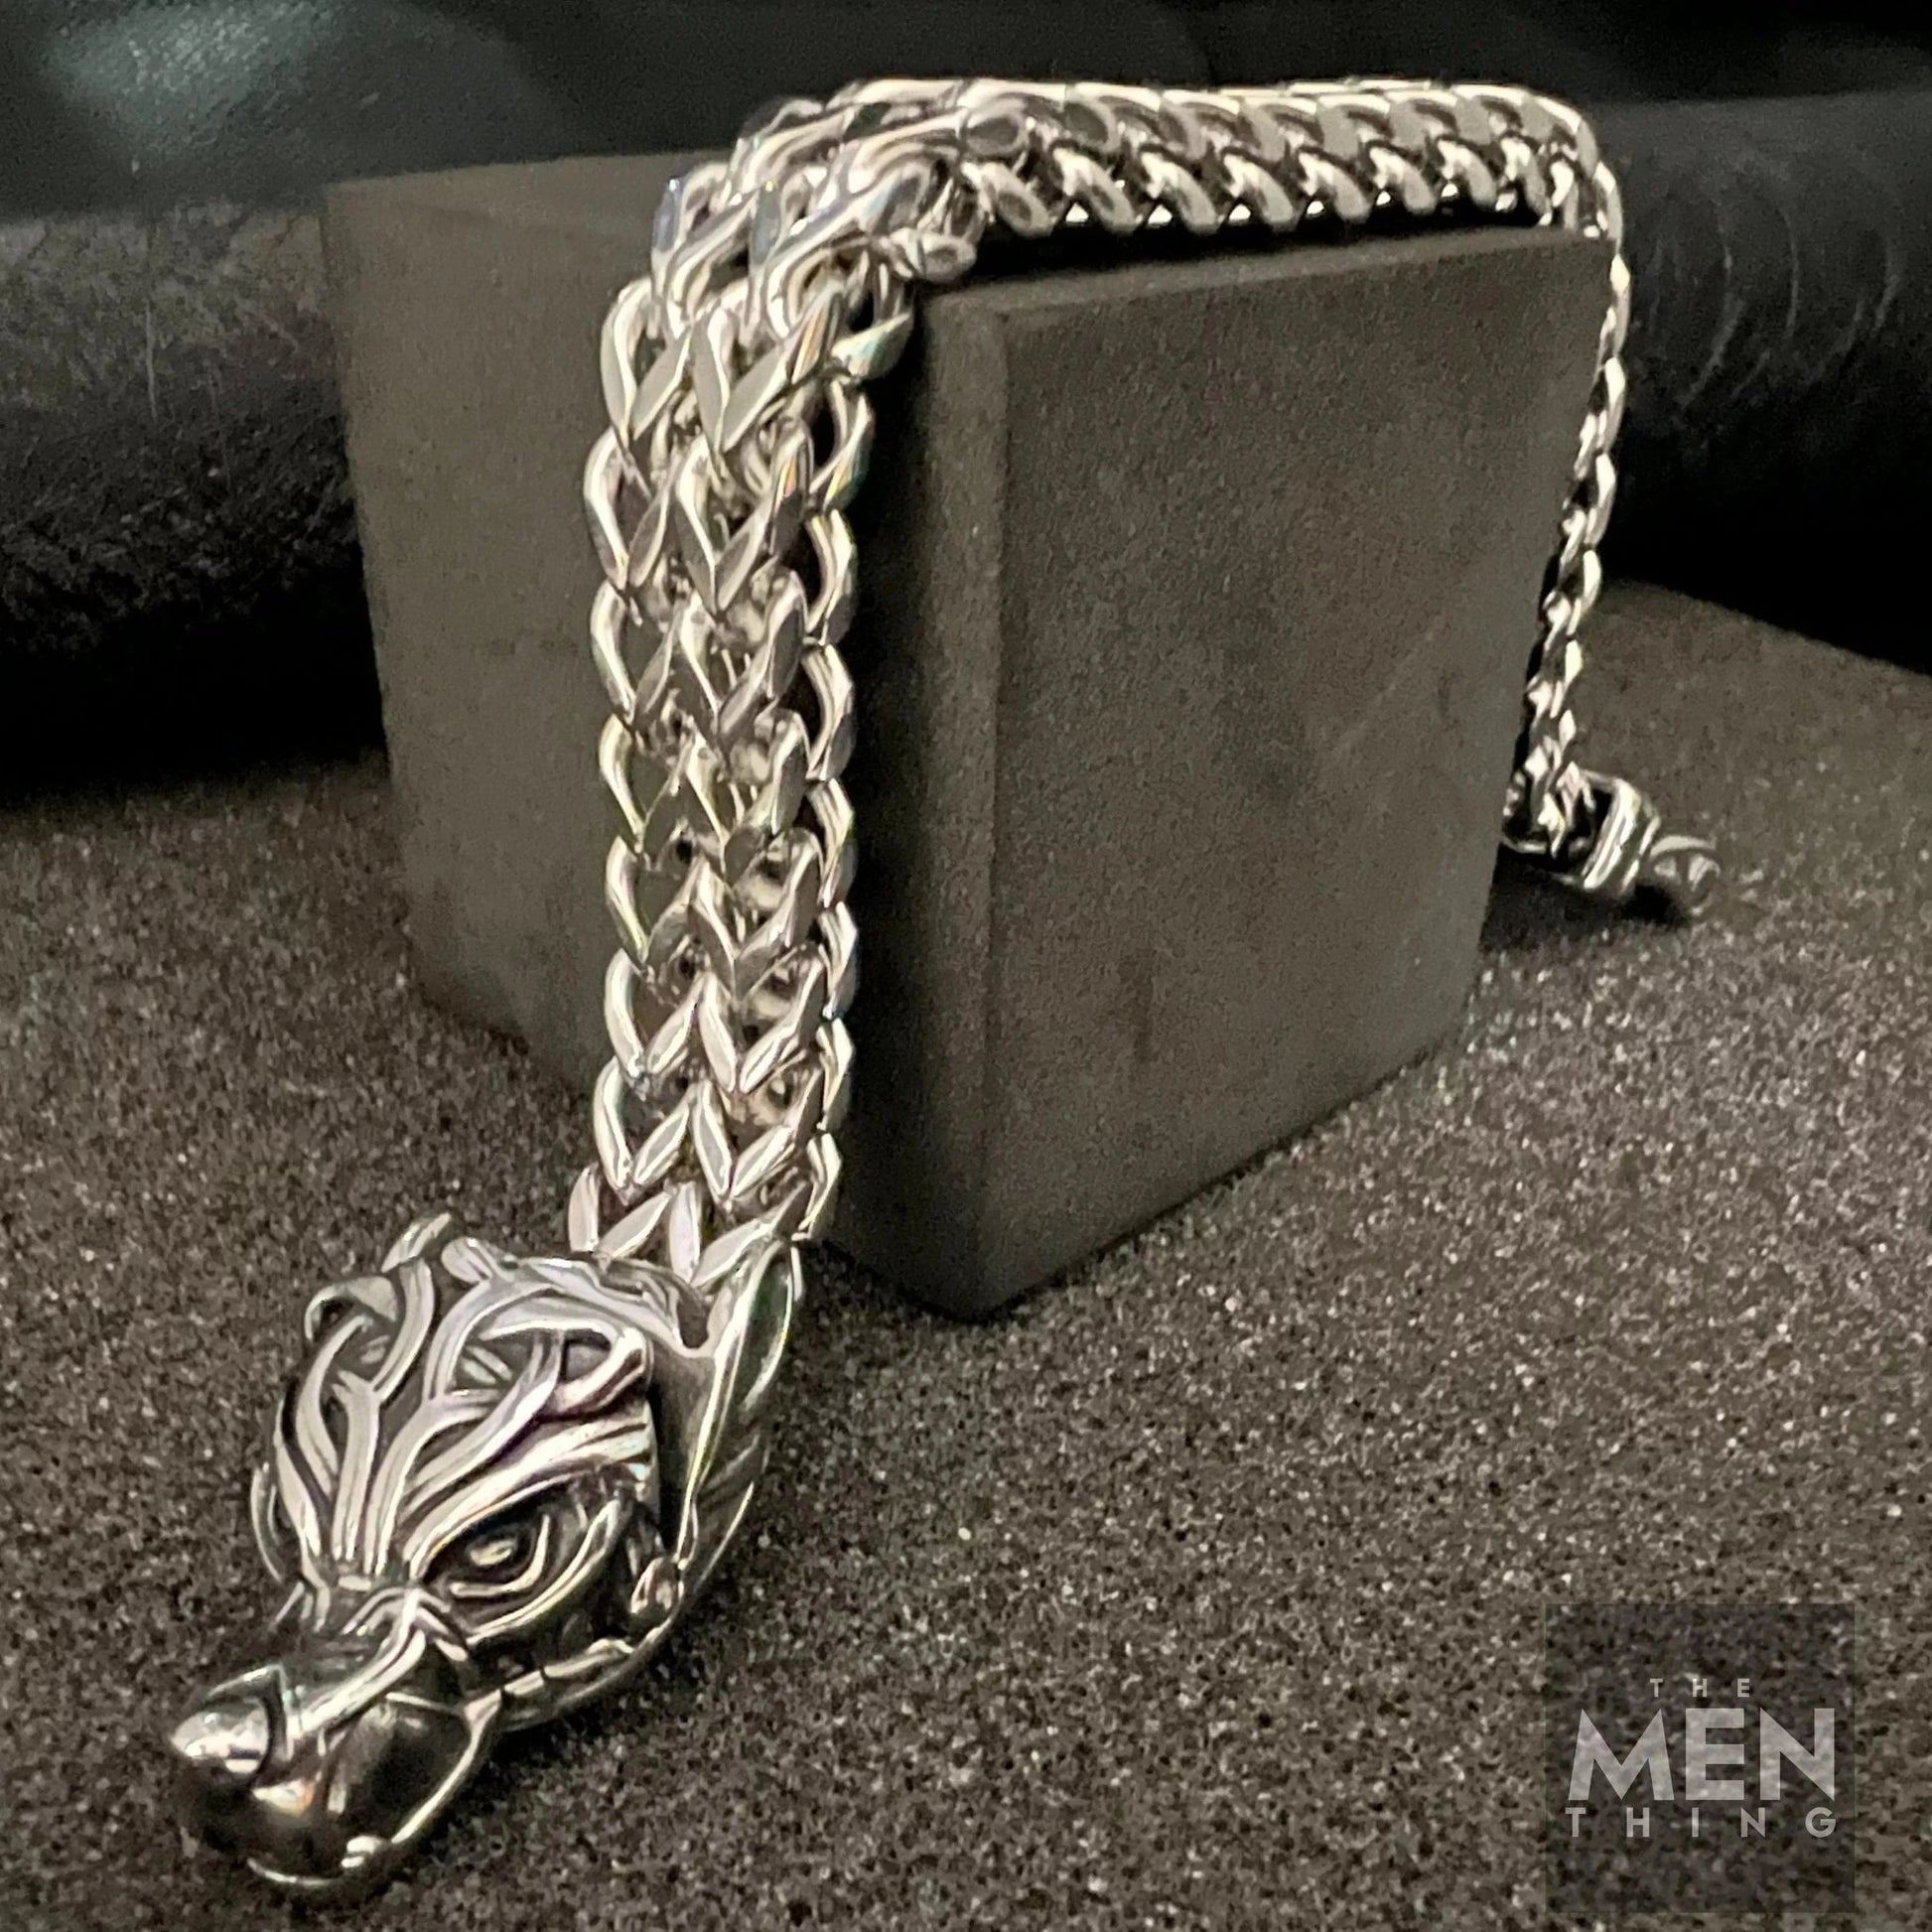 THE MEN THING 12mm Pure Stainless Steel Viking Bracelet, American trending Style - Viking Arm Rings, Norse Bracelet with Wolf Head for Men & Boys (8inch)